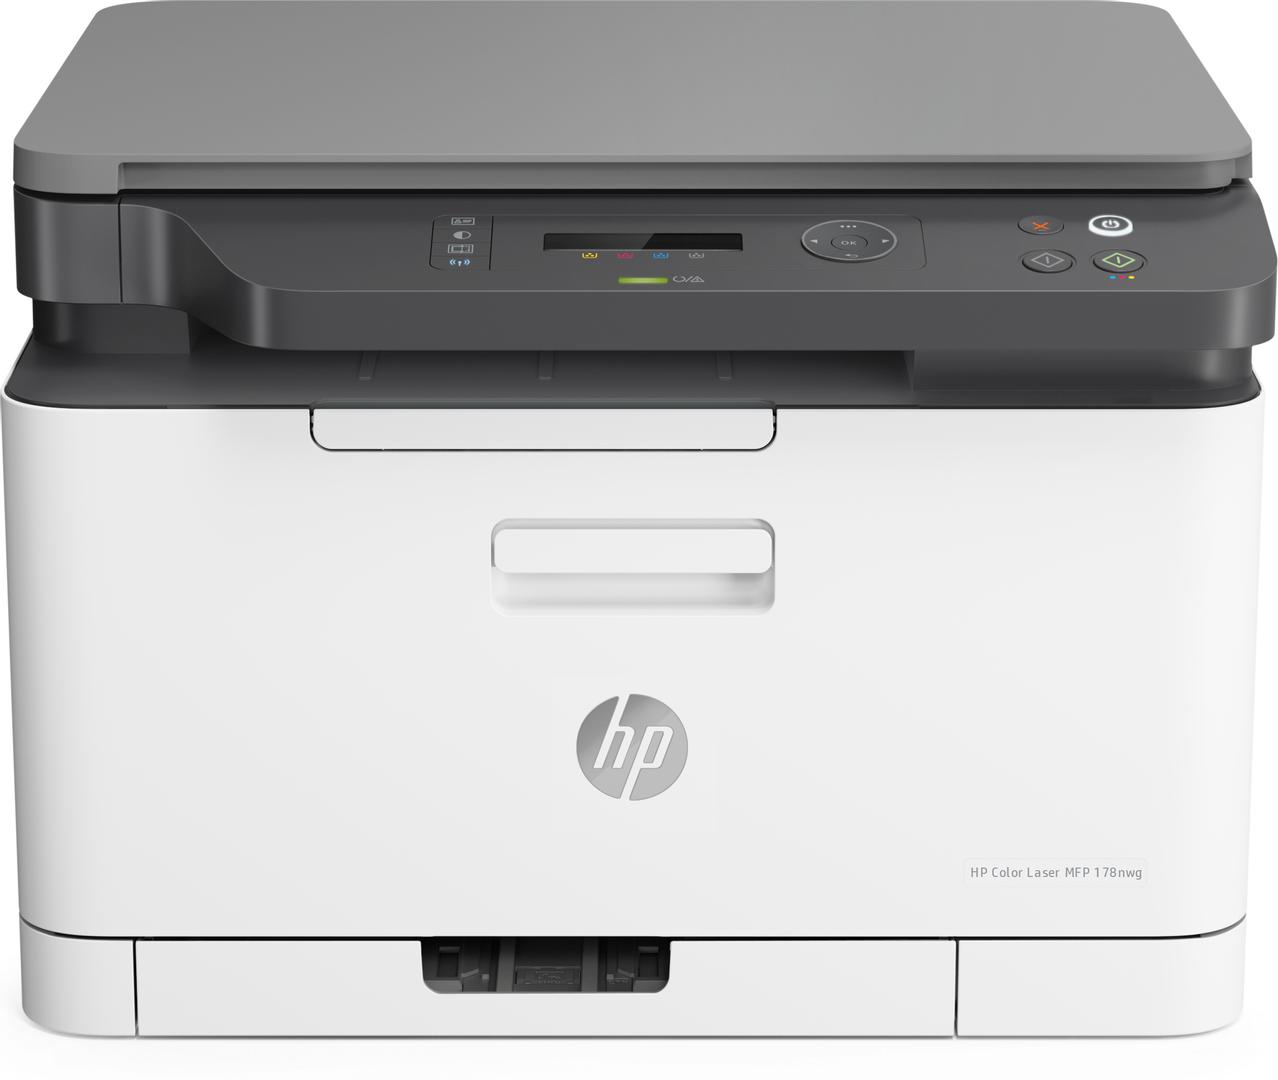 Preventie transactie Reflectie HP P Color Laser MFP 178nw - Multifunction printer - colour - laser - A4  (210 x 297 mm) (original) - A4/Letter (media) - up to 18 ppm (copying) - up  to 18 ppm (printing) - 150 sheets - USB 2.0, LAN, Wi-F | Synigo